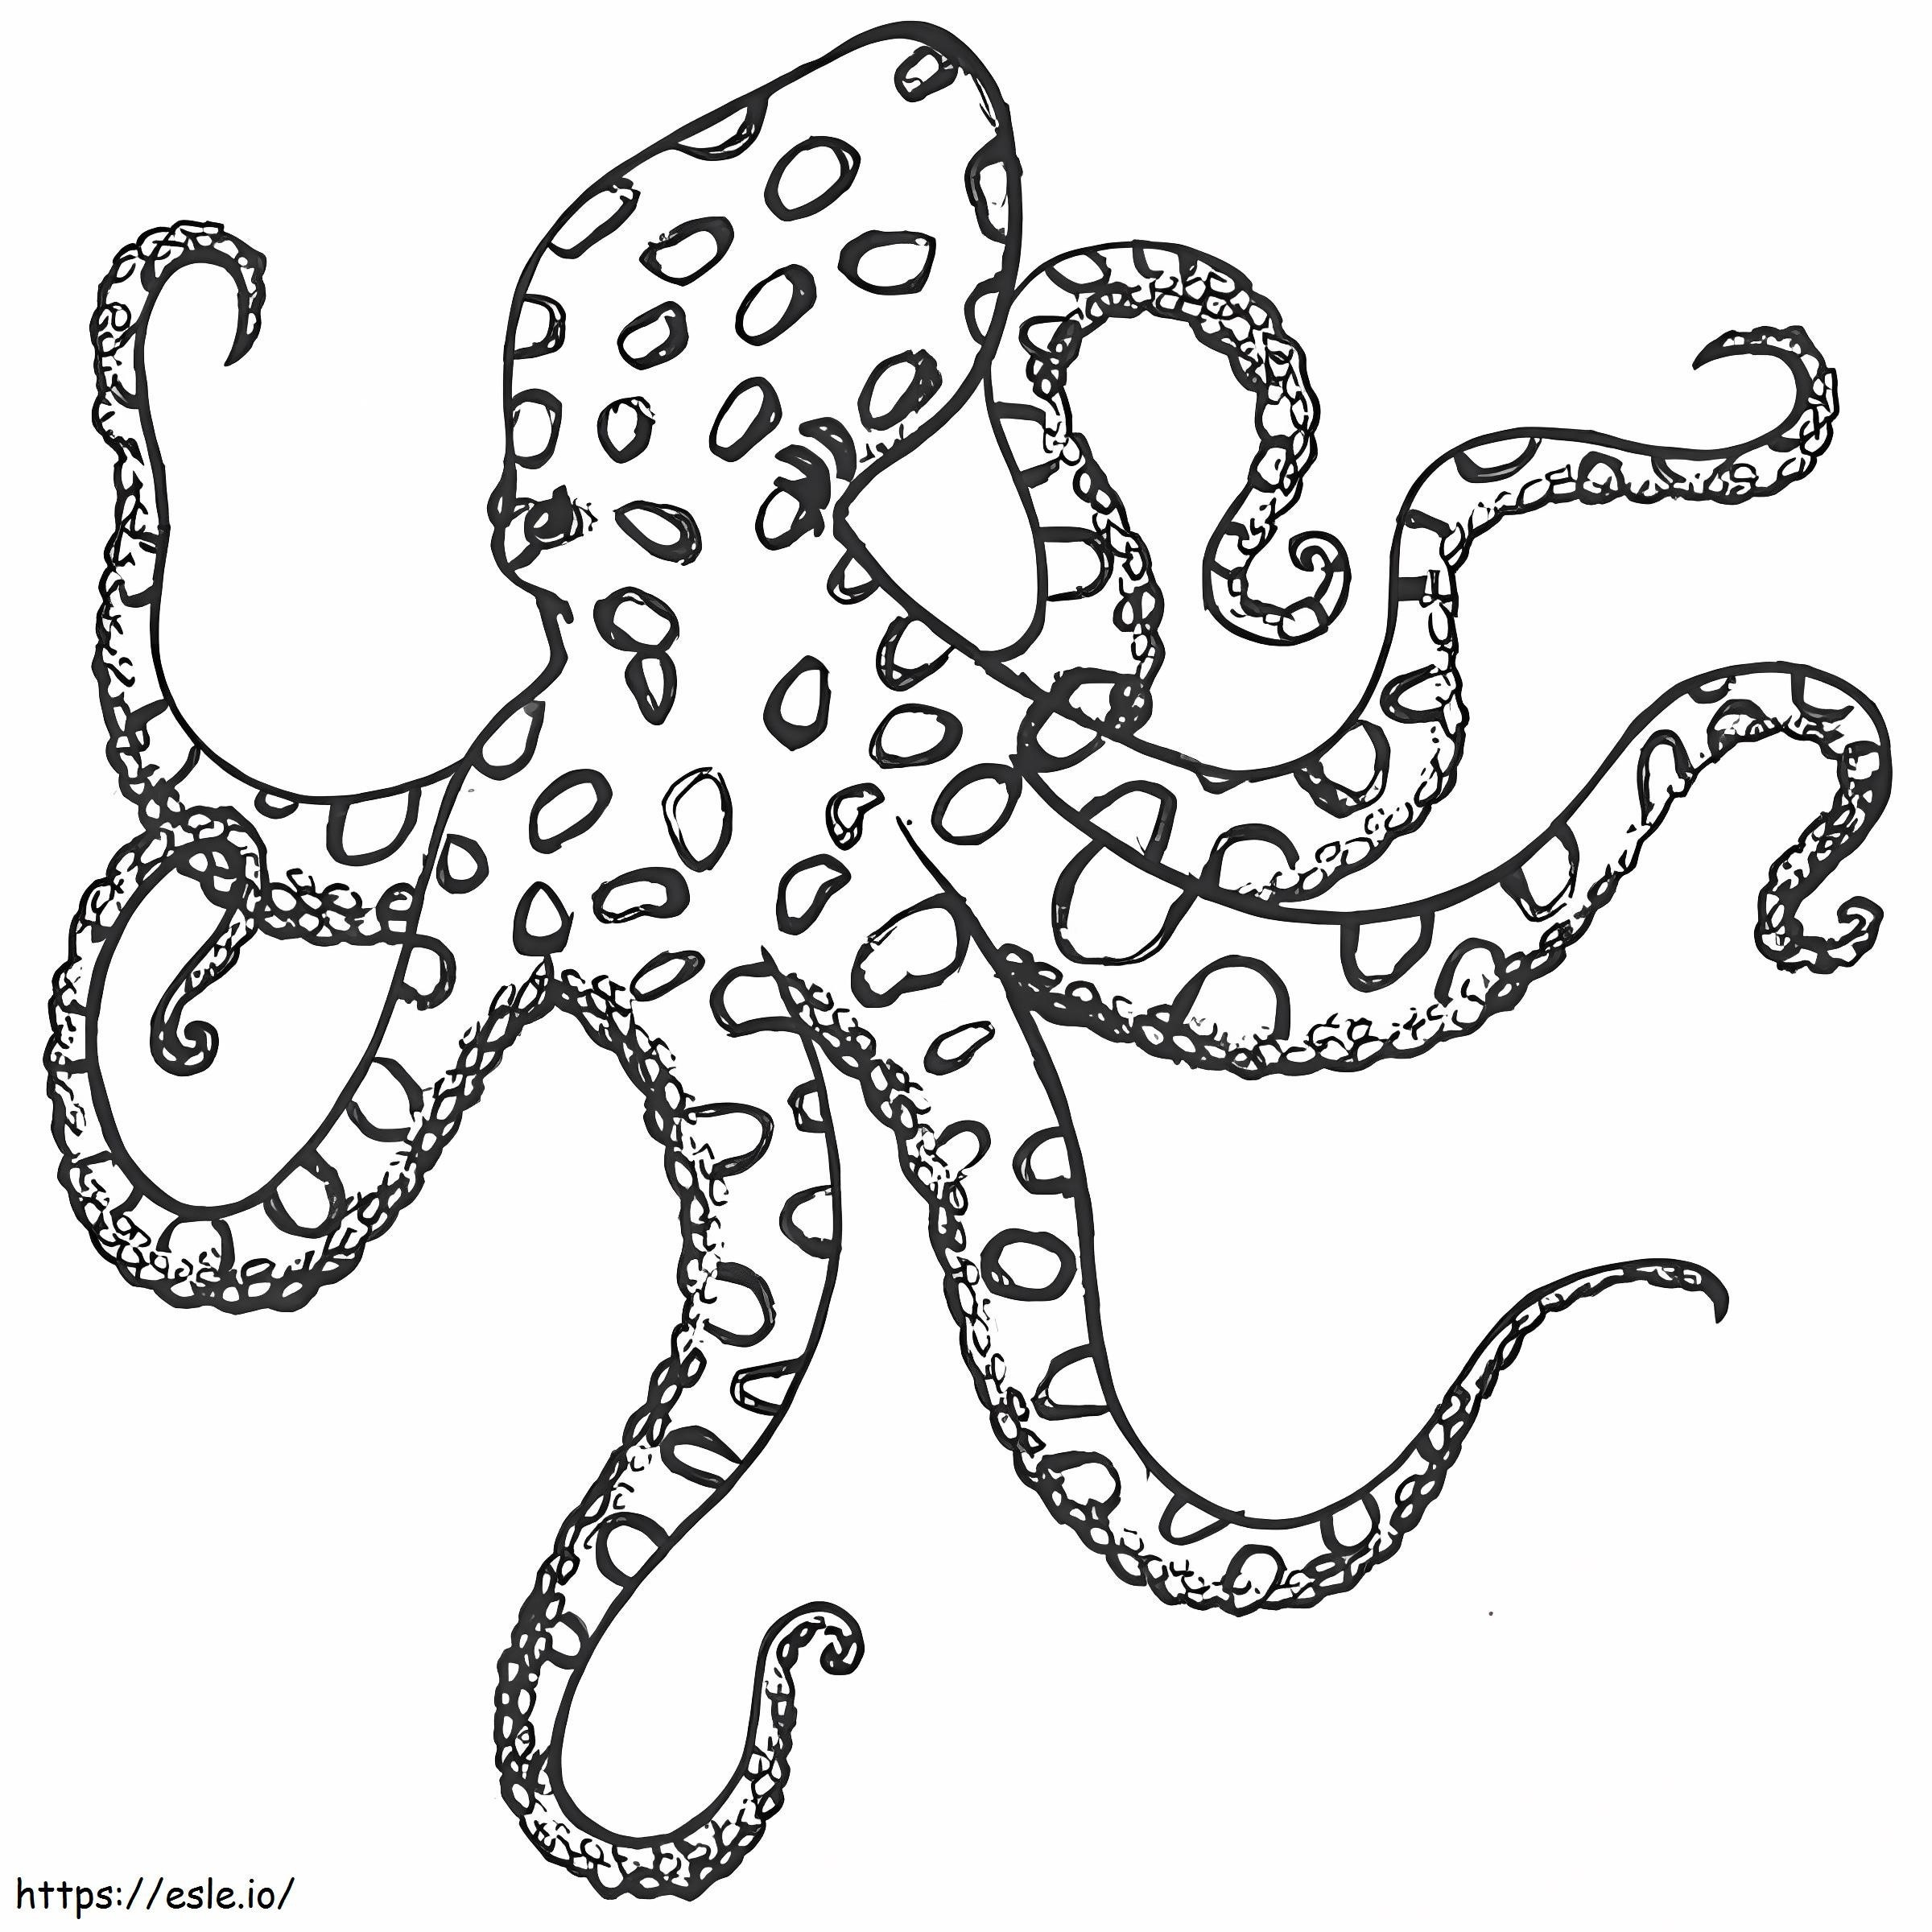 Regular Octopus coloring page